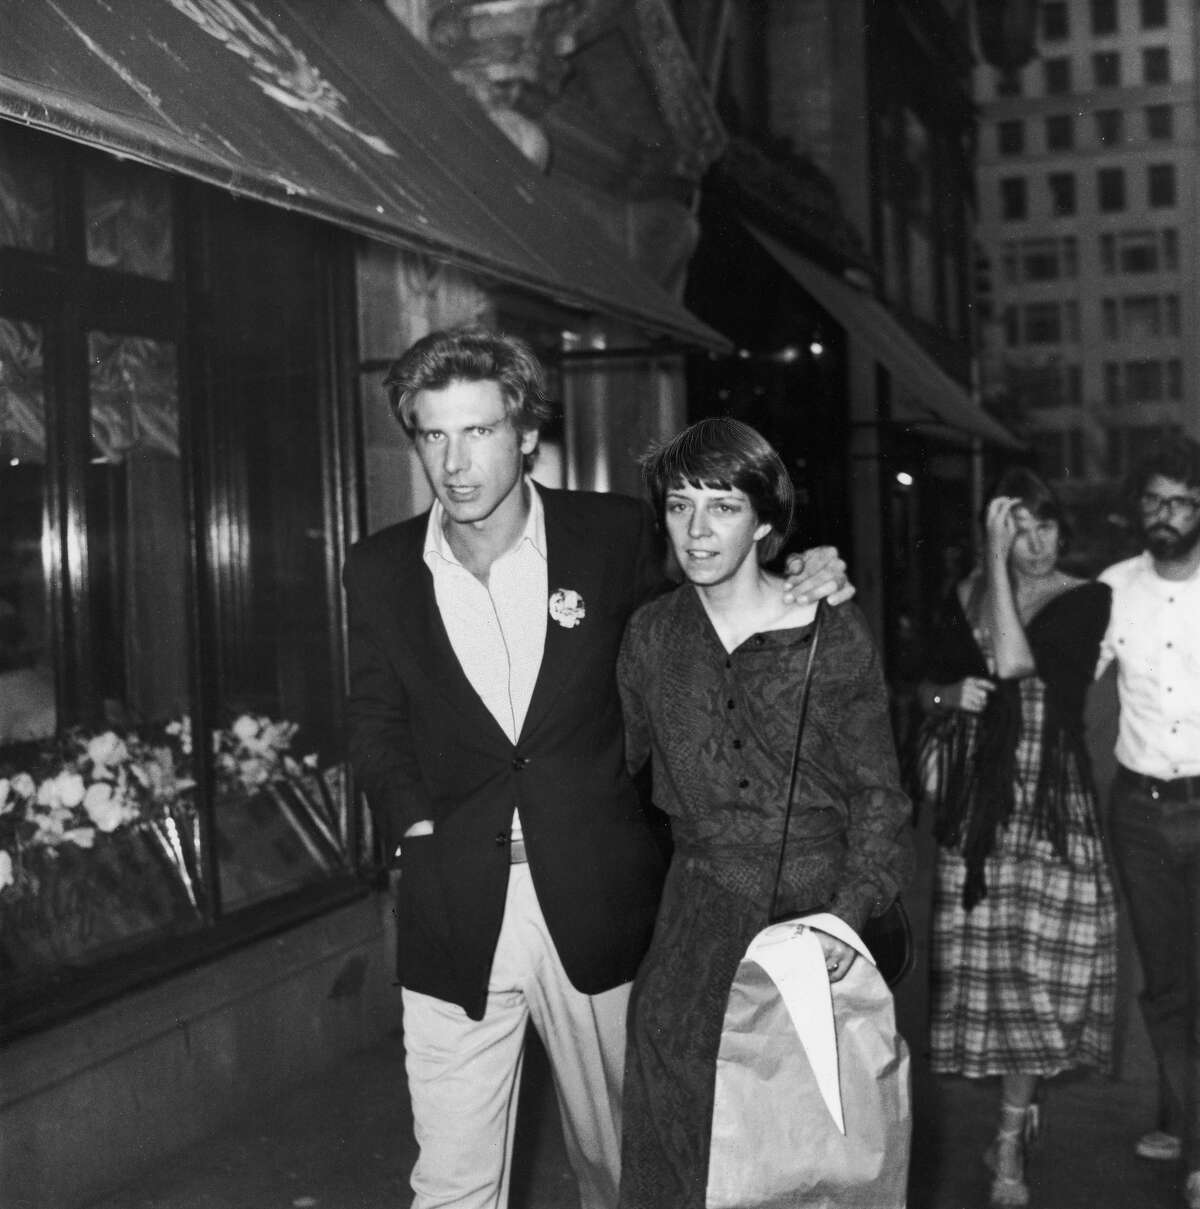 June 1977: American actor Harrison Ford and wife, Mary Marquardt, walking in New York City. Filmmaker George Lucas and wife, Marcia, walk behind them. Images)